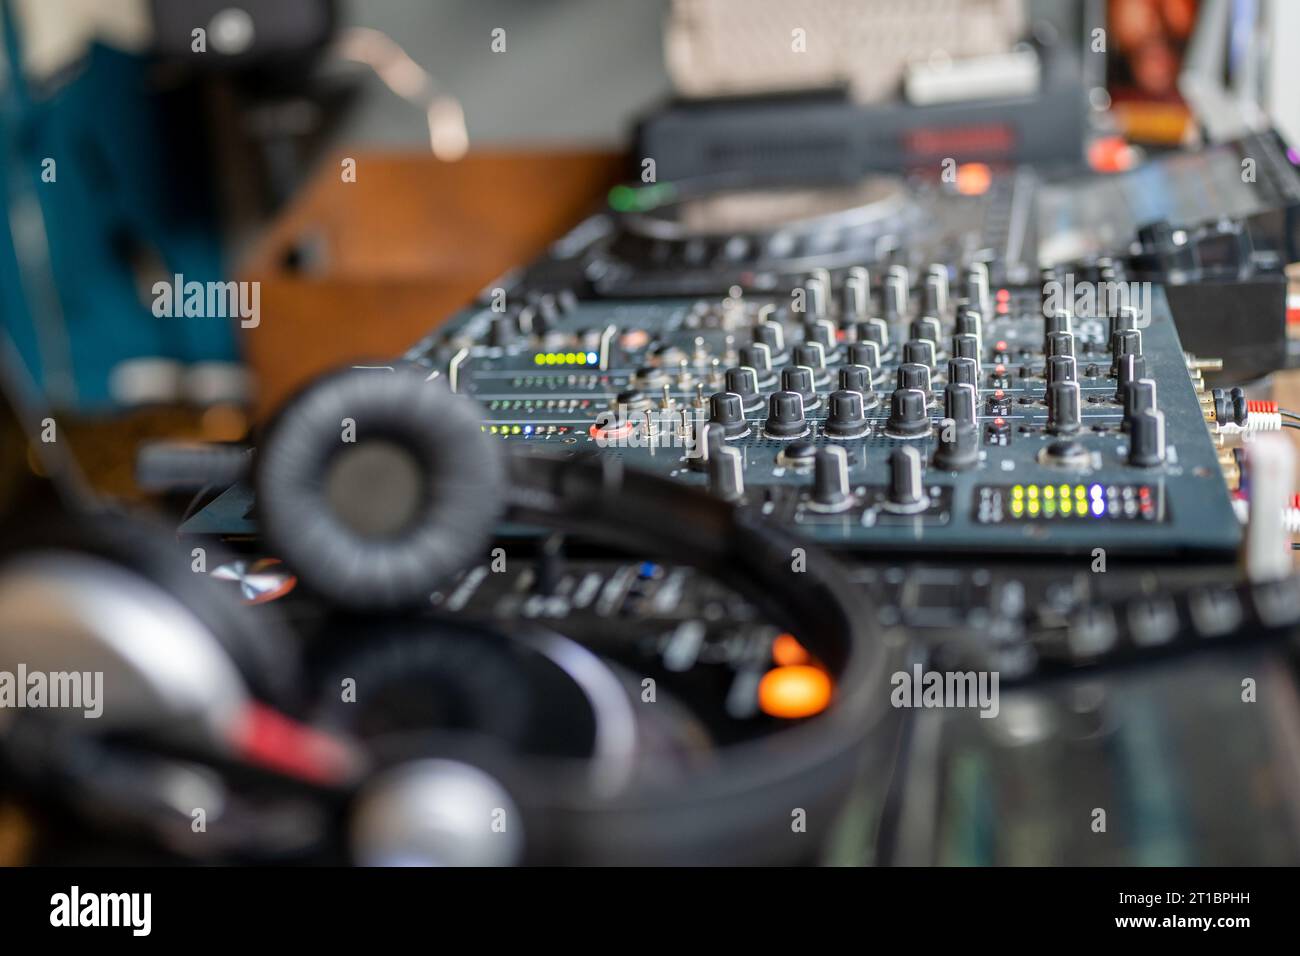 DJ console. Amplifying equipment, studio audio mixer knobs and faders. Music production, creation. Stock Photo